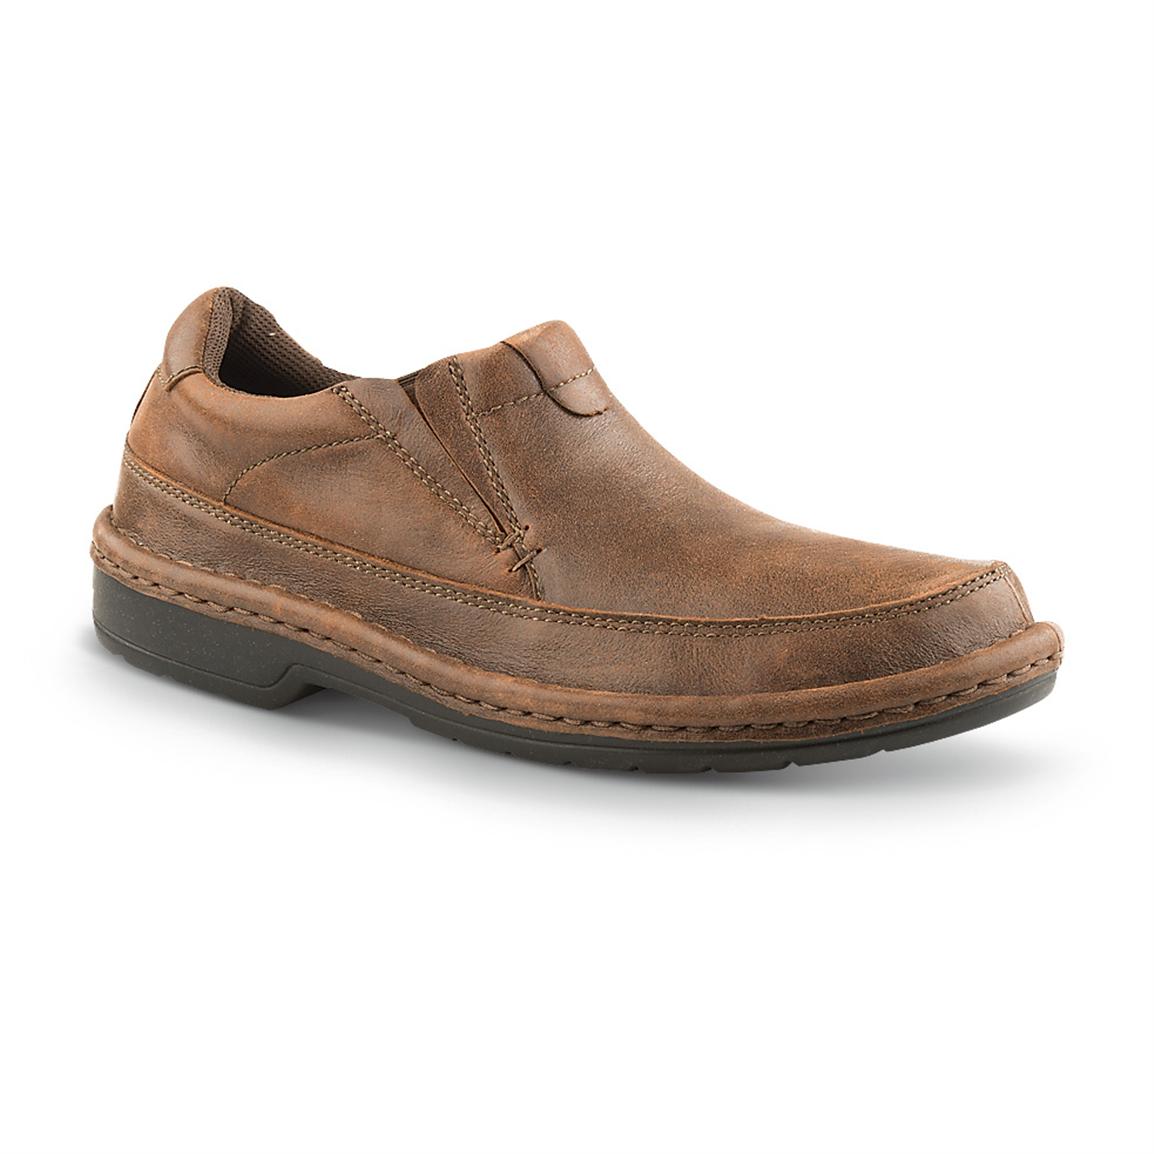 Men's Roper Opanka Casual Shoes - 608725, Casual Shoes at Sportsman's Guide